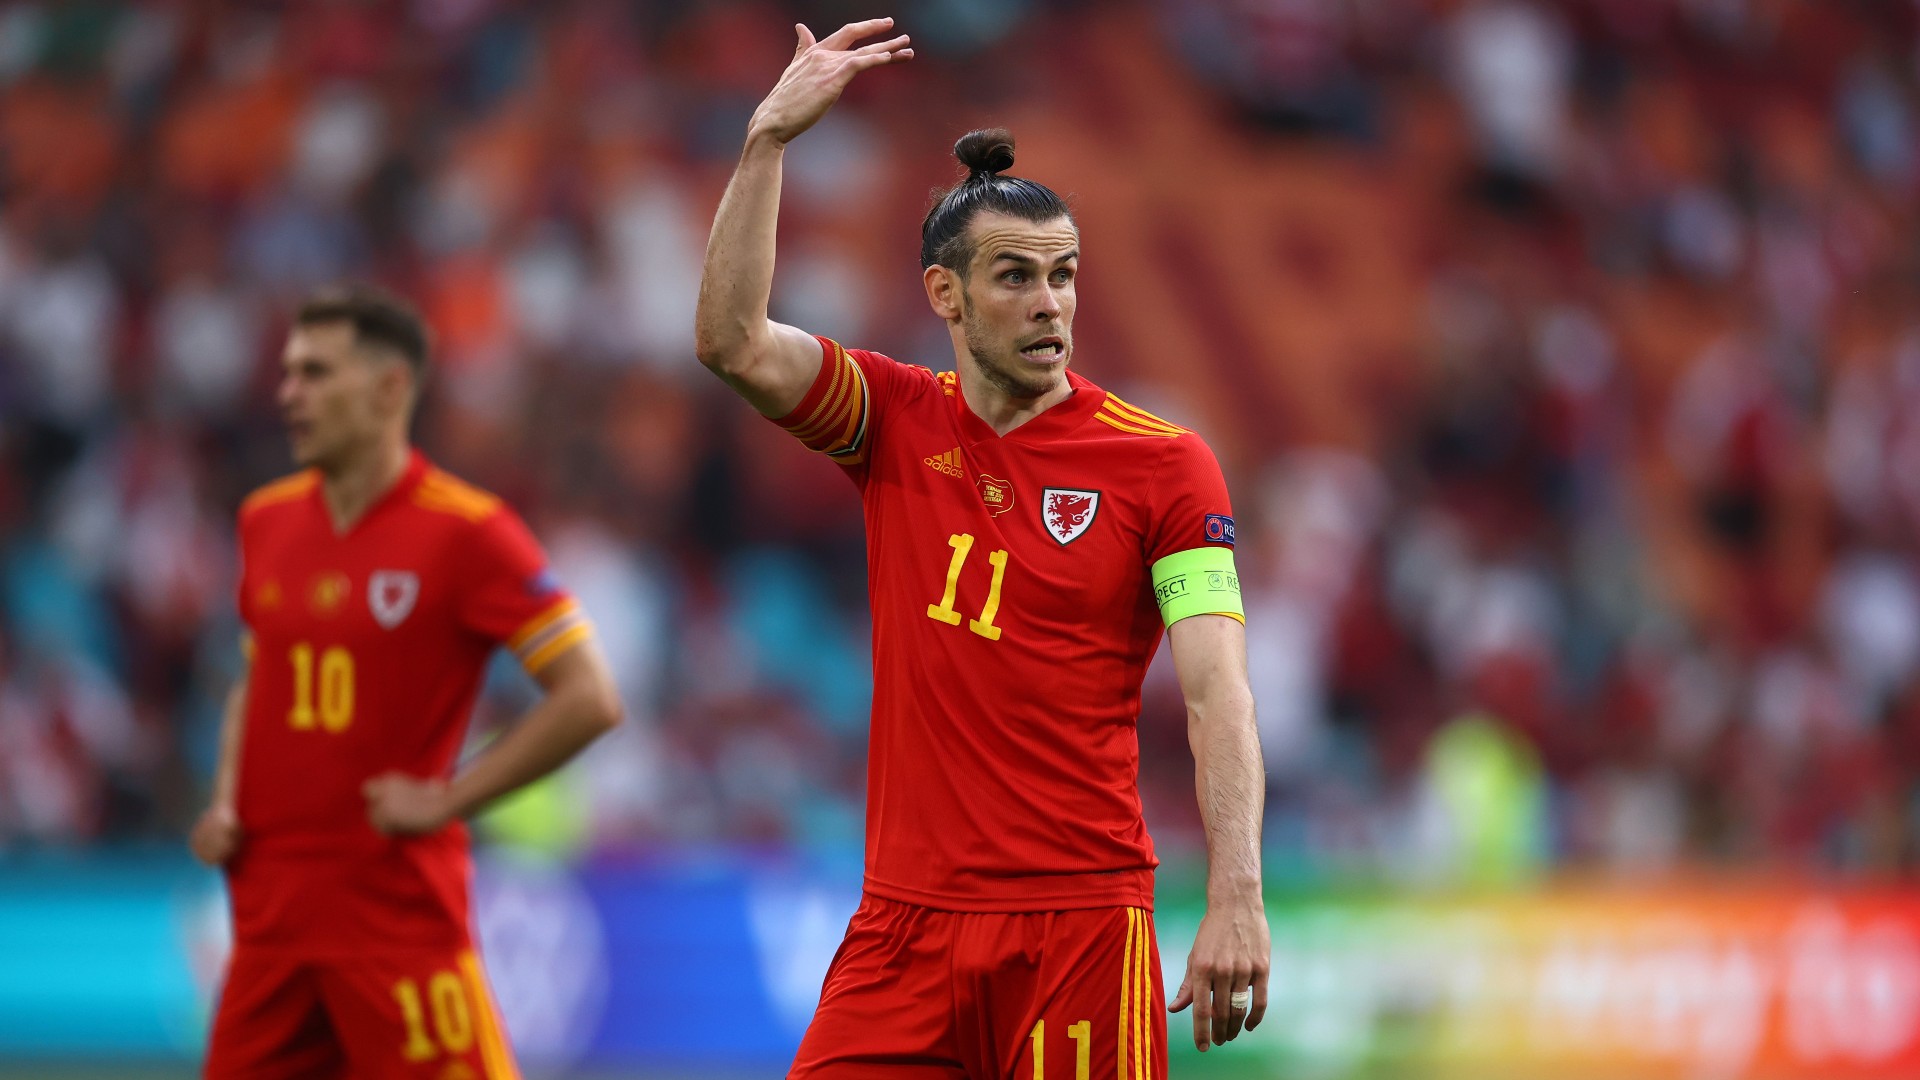 Bale would support walk-off amid racist abuse